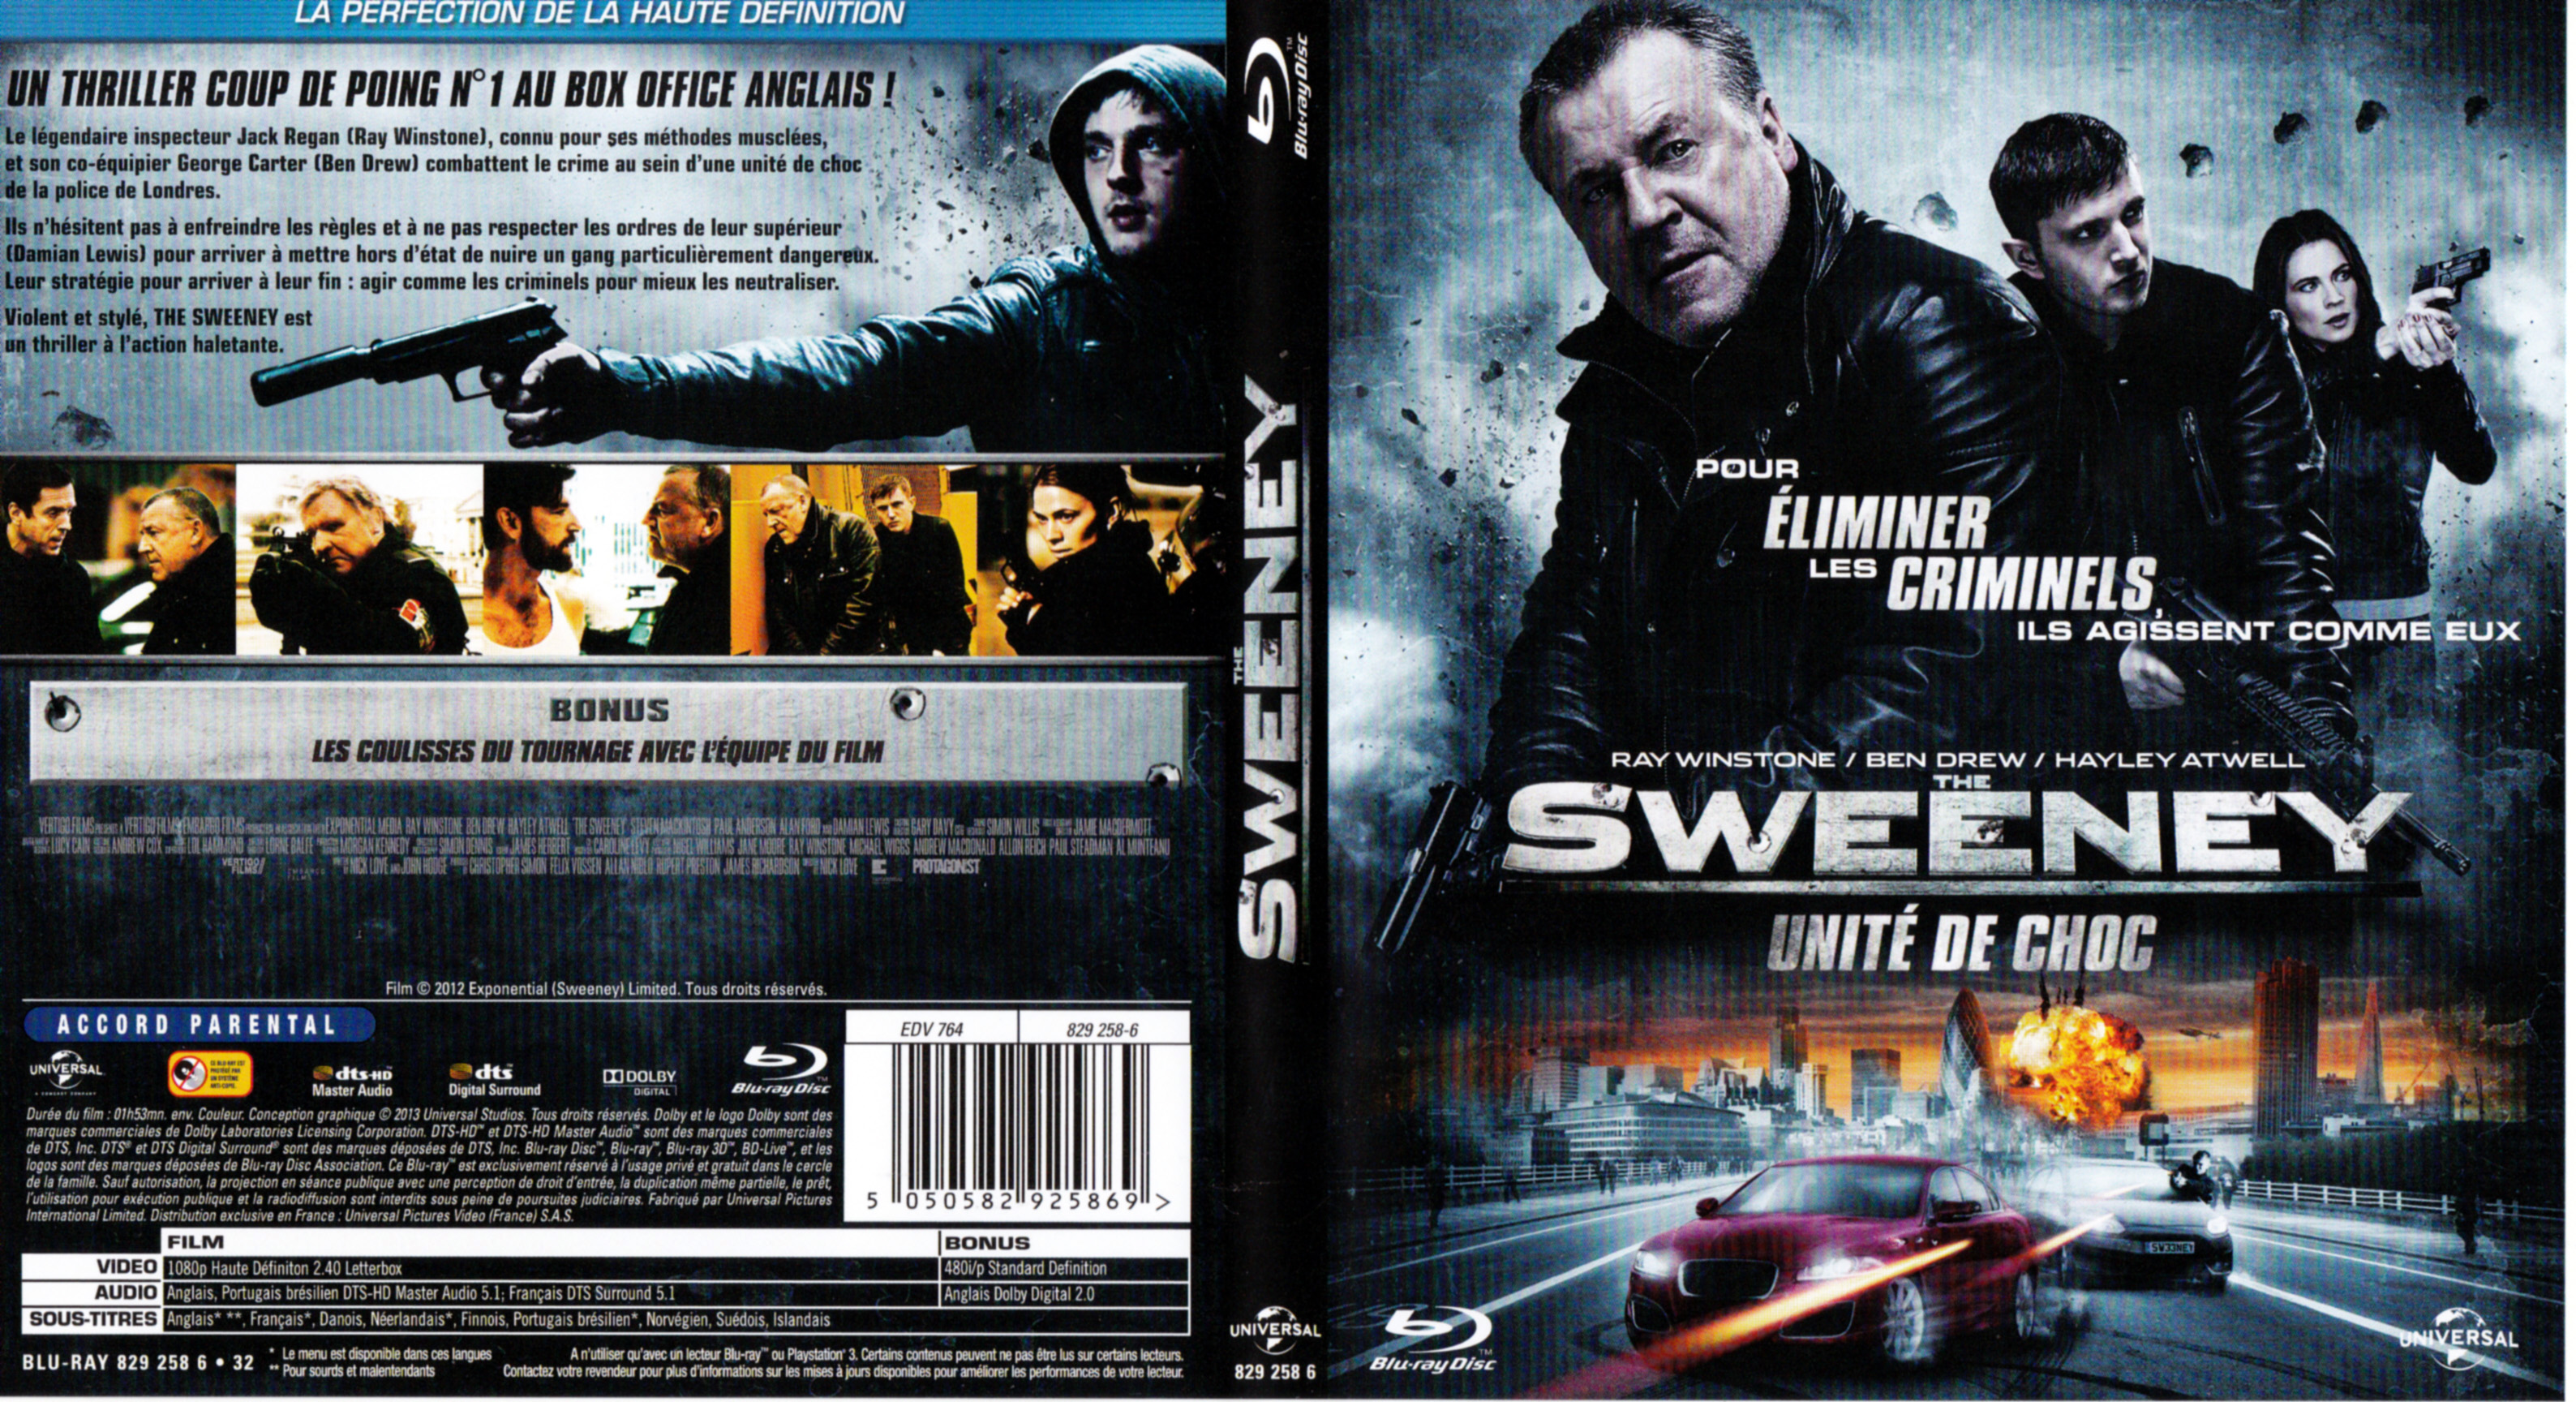 Jaquette DVD The sweeney (BLU-RAY)